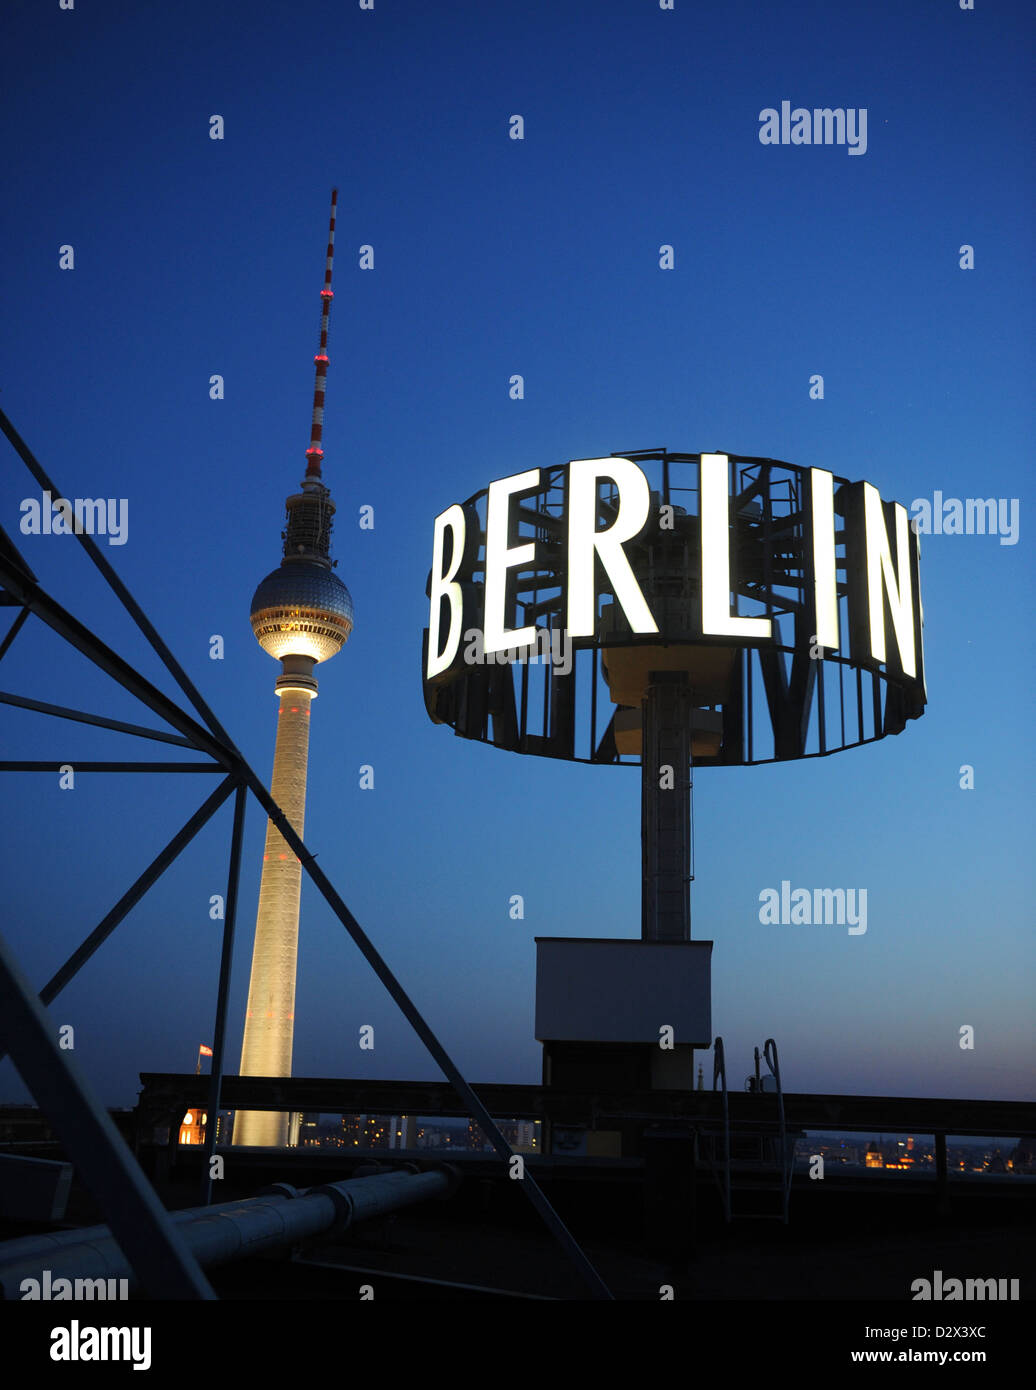 Berlin, Germany, illuminated sign with the word Berlin TV